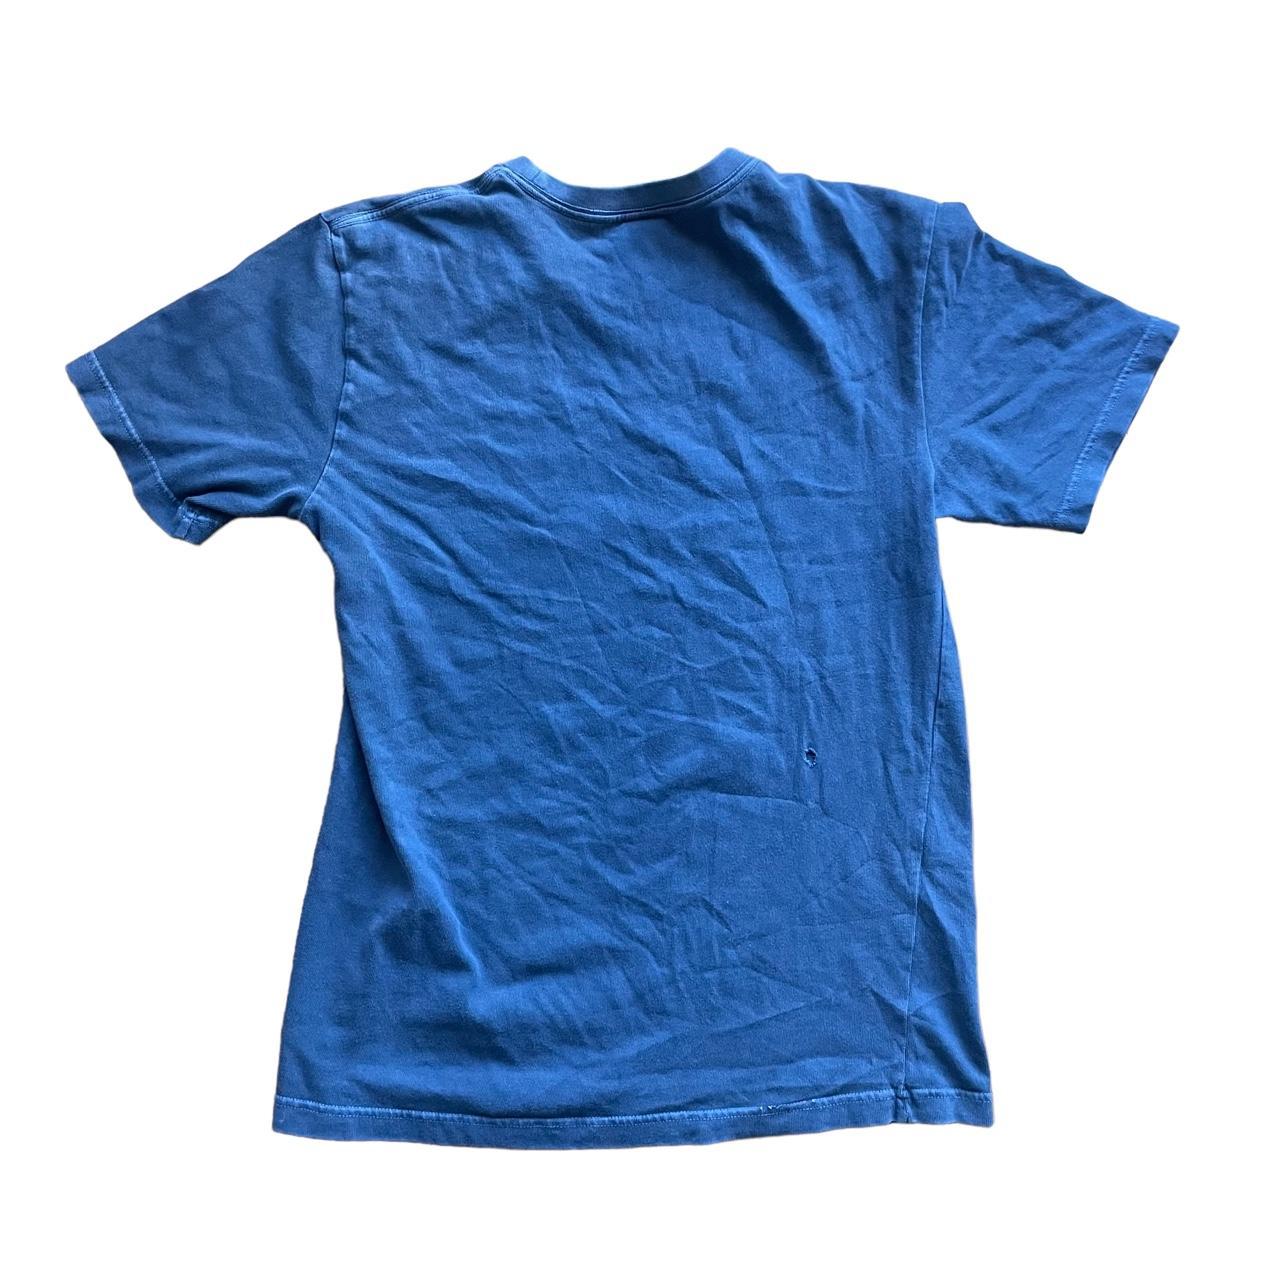 Urban Outfitters Men's Blue and Cream T-shirt (2)